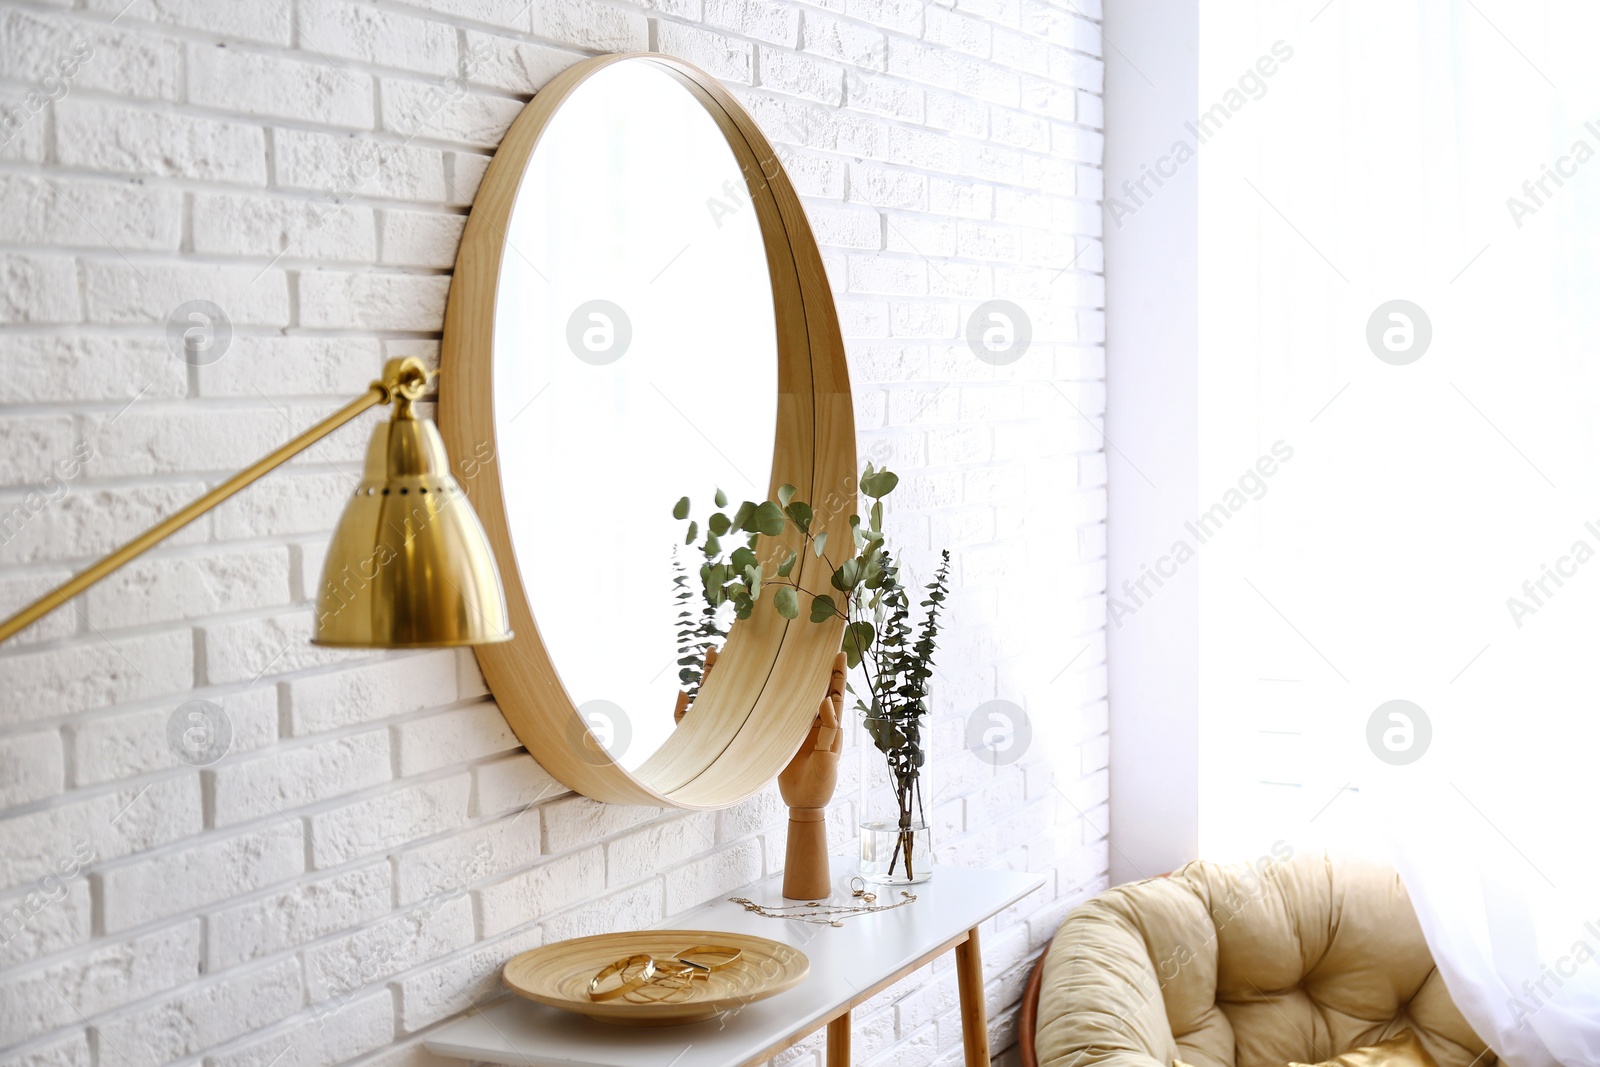 Photo of Big round mirror, table with jewelry and decor near brick wall in hallway interior. Space for text